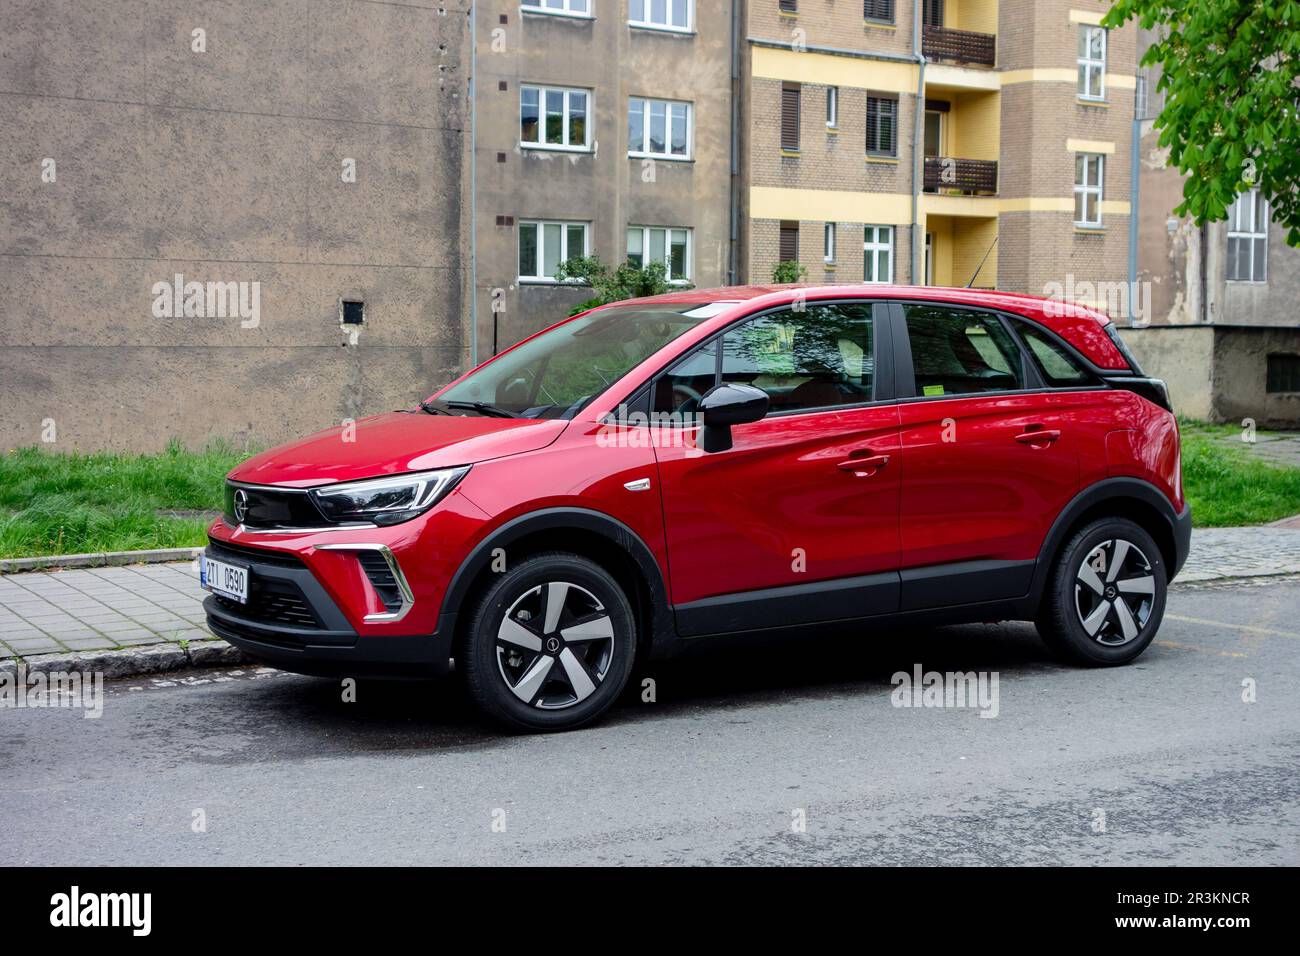 OSTRAVA, CZECH REPUBLIC - MAY 3, 2023: Opel Corssland small MPV with red colour parked on a street Stock Photo